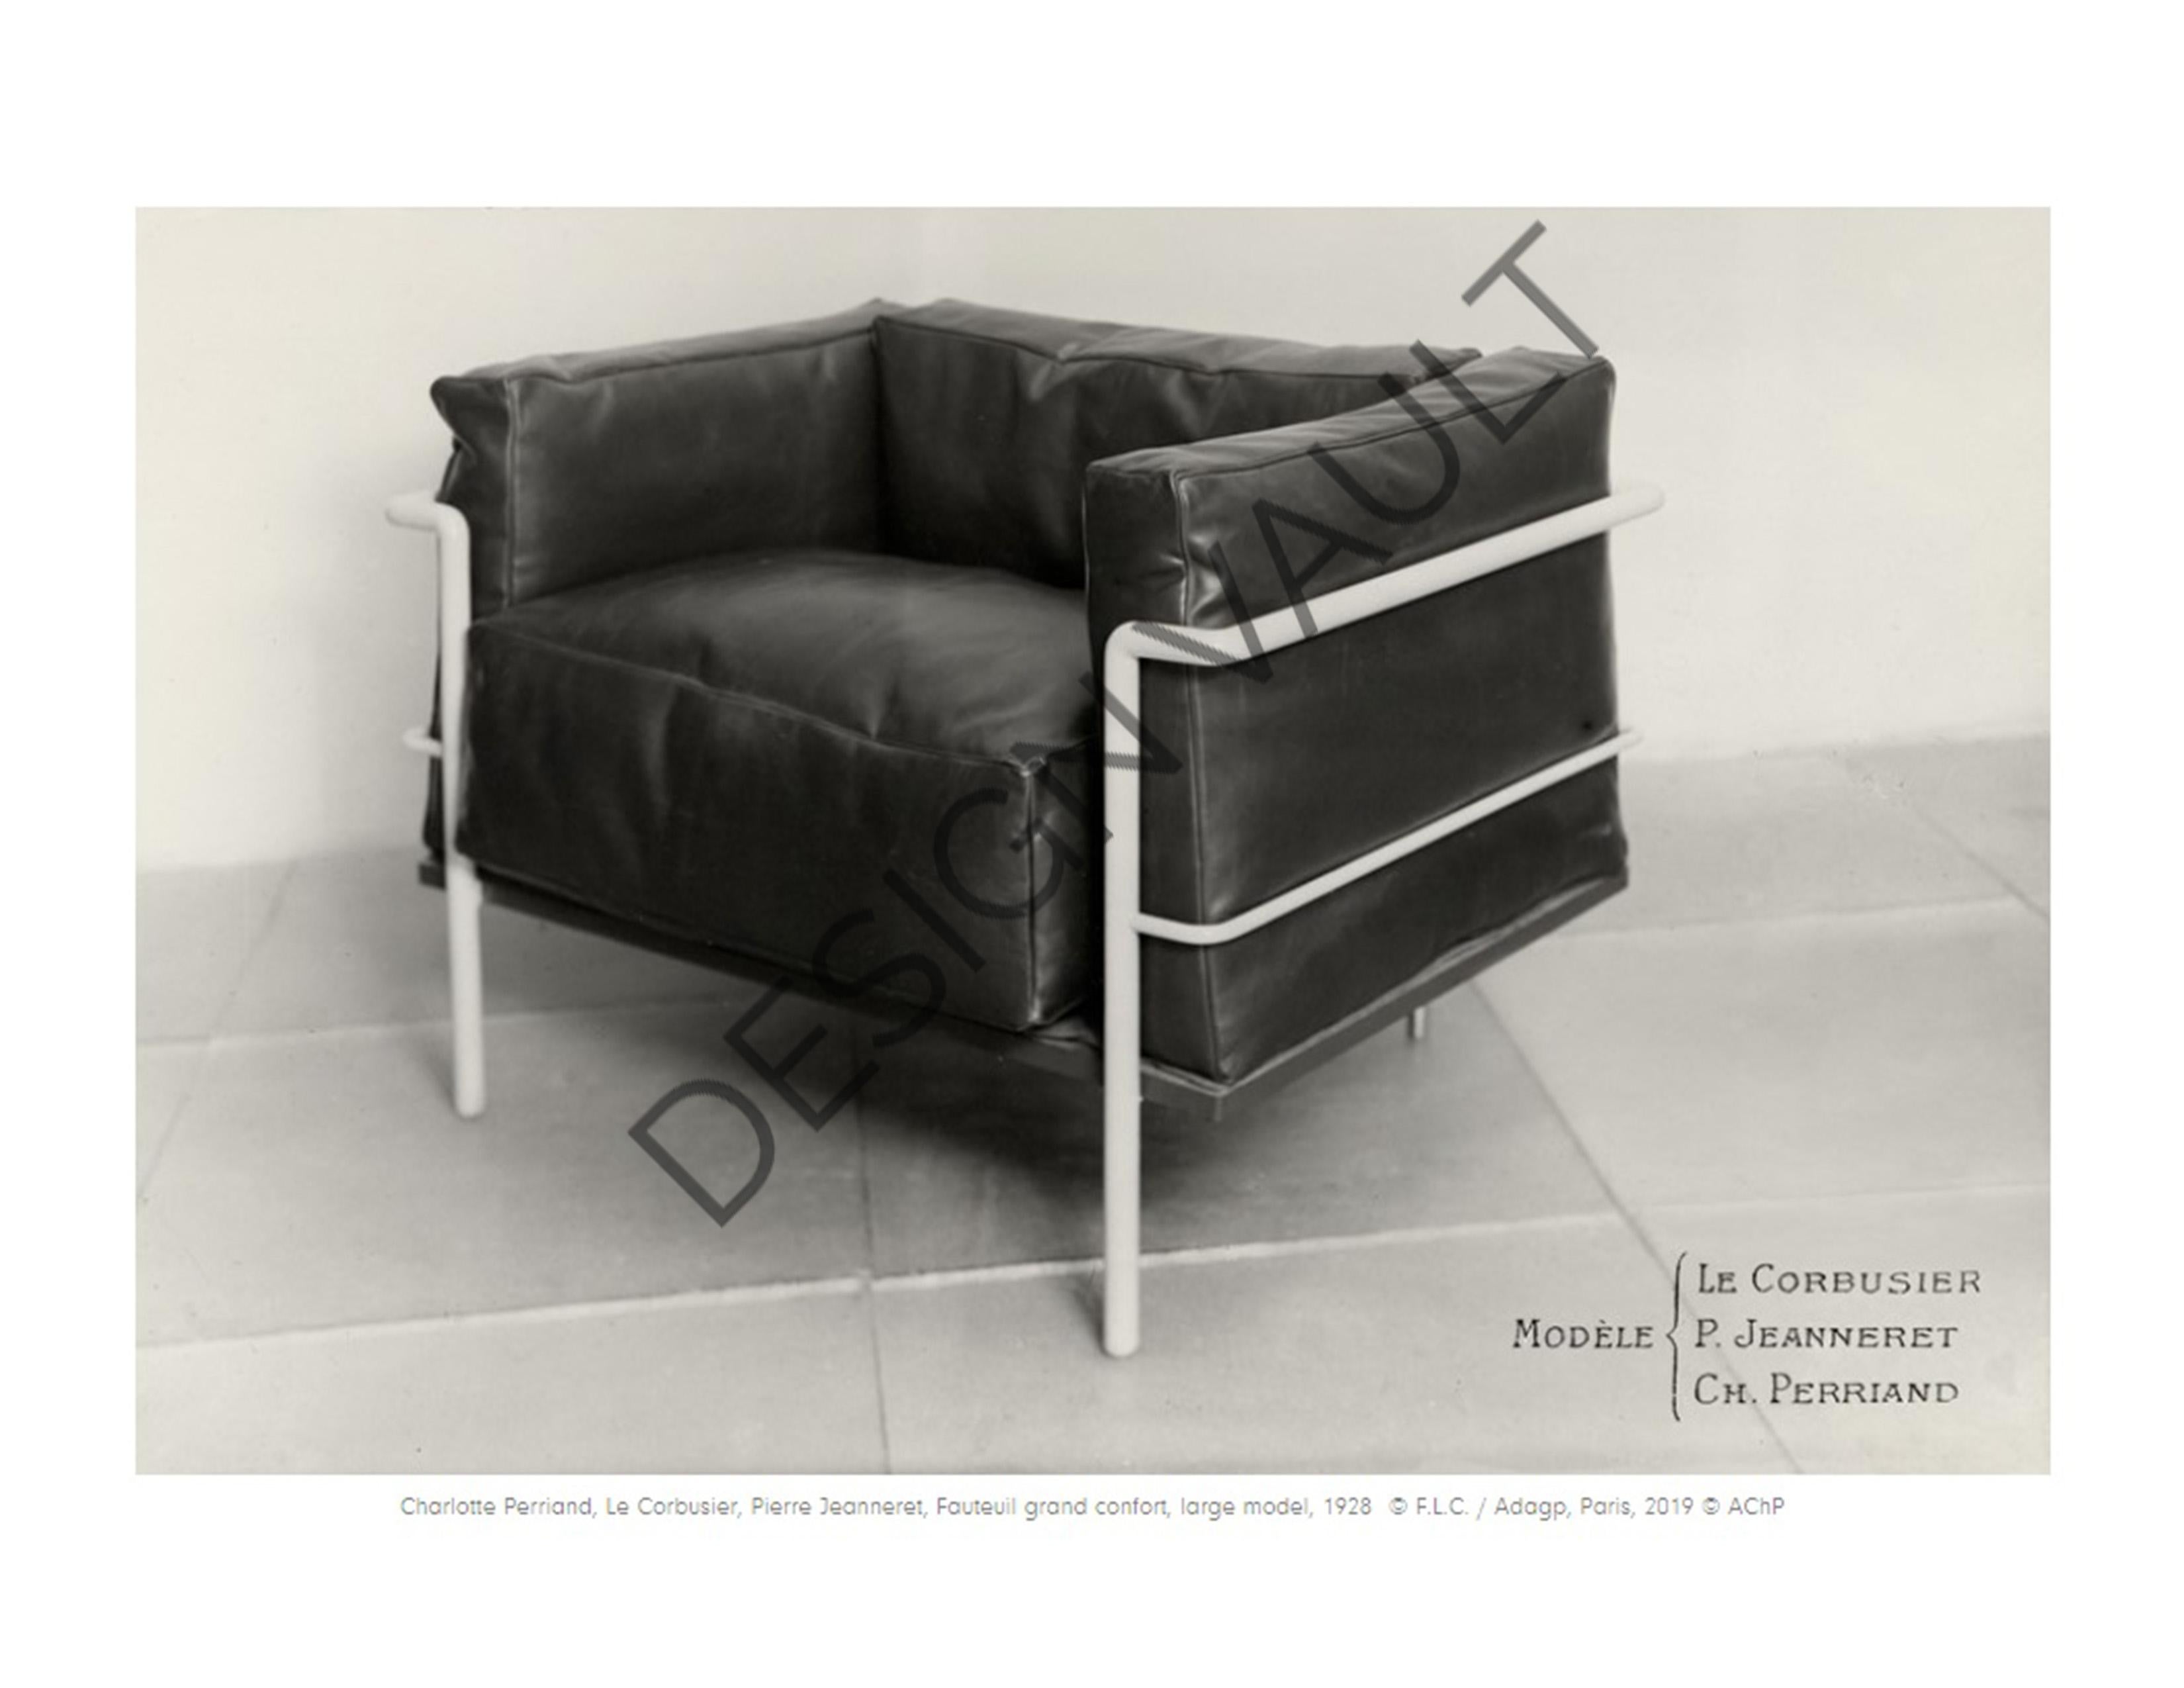 Pierre Jeanneret, Charlotte Perriand & Le Corbusier Grand Comfort Loungesessel im Angebot 4